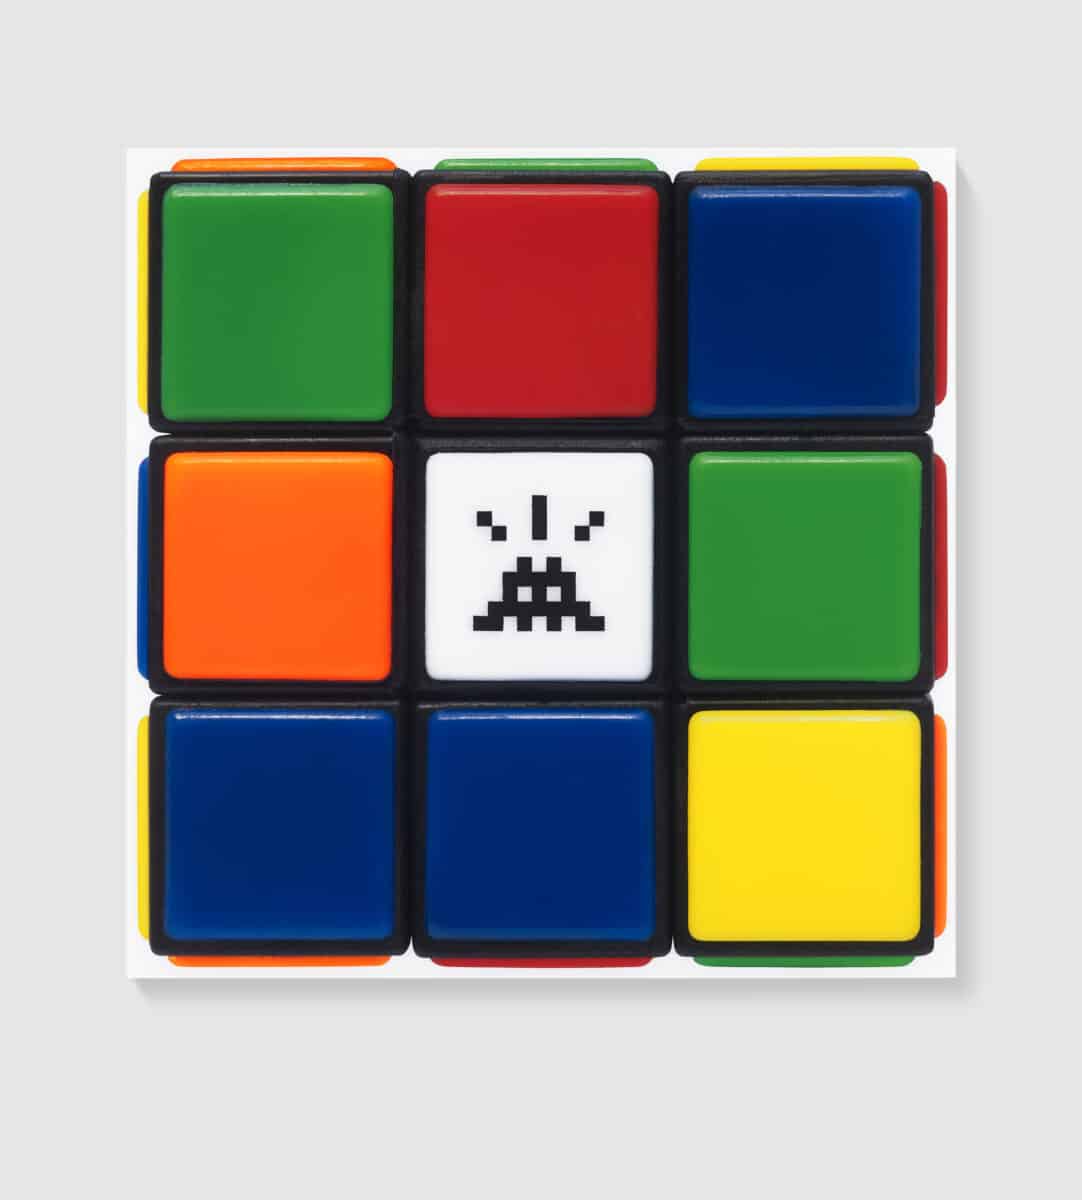 Invader releases Rubikcubism - a limited edition print series on HENI